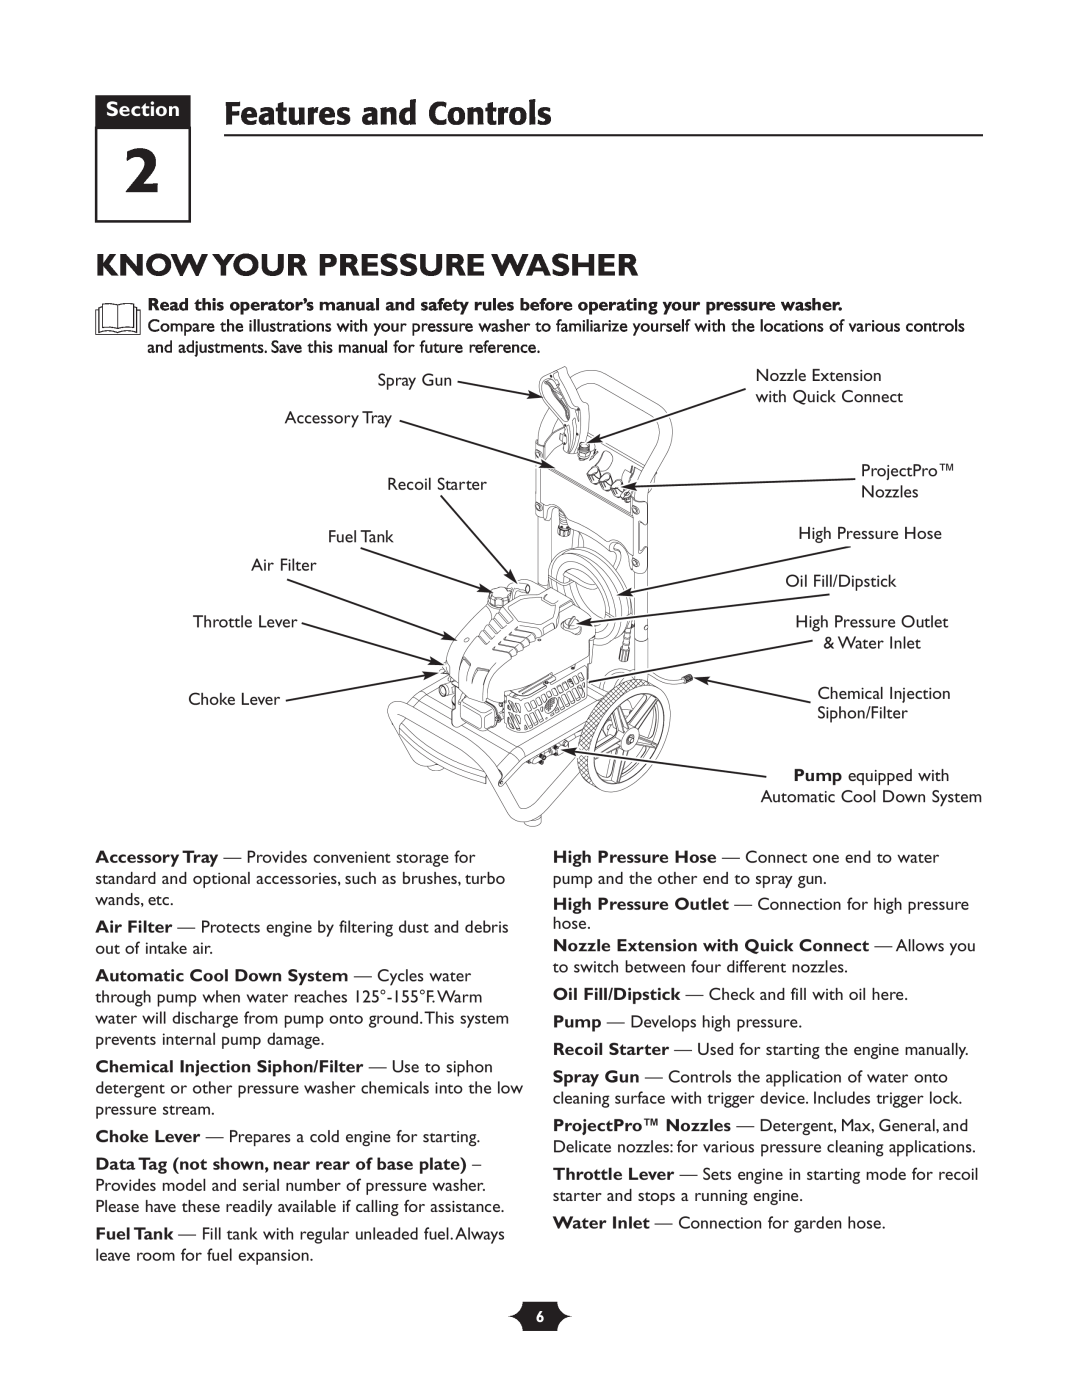 Briggs & Stratton 20270 operating instructions Section Features and Controls, Know Your Pressure Washer 